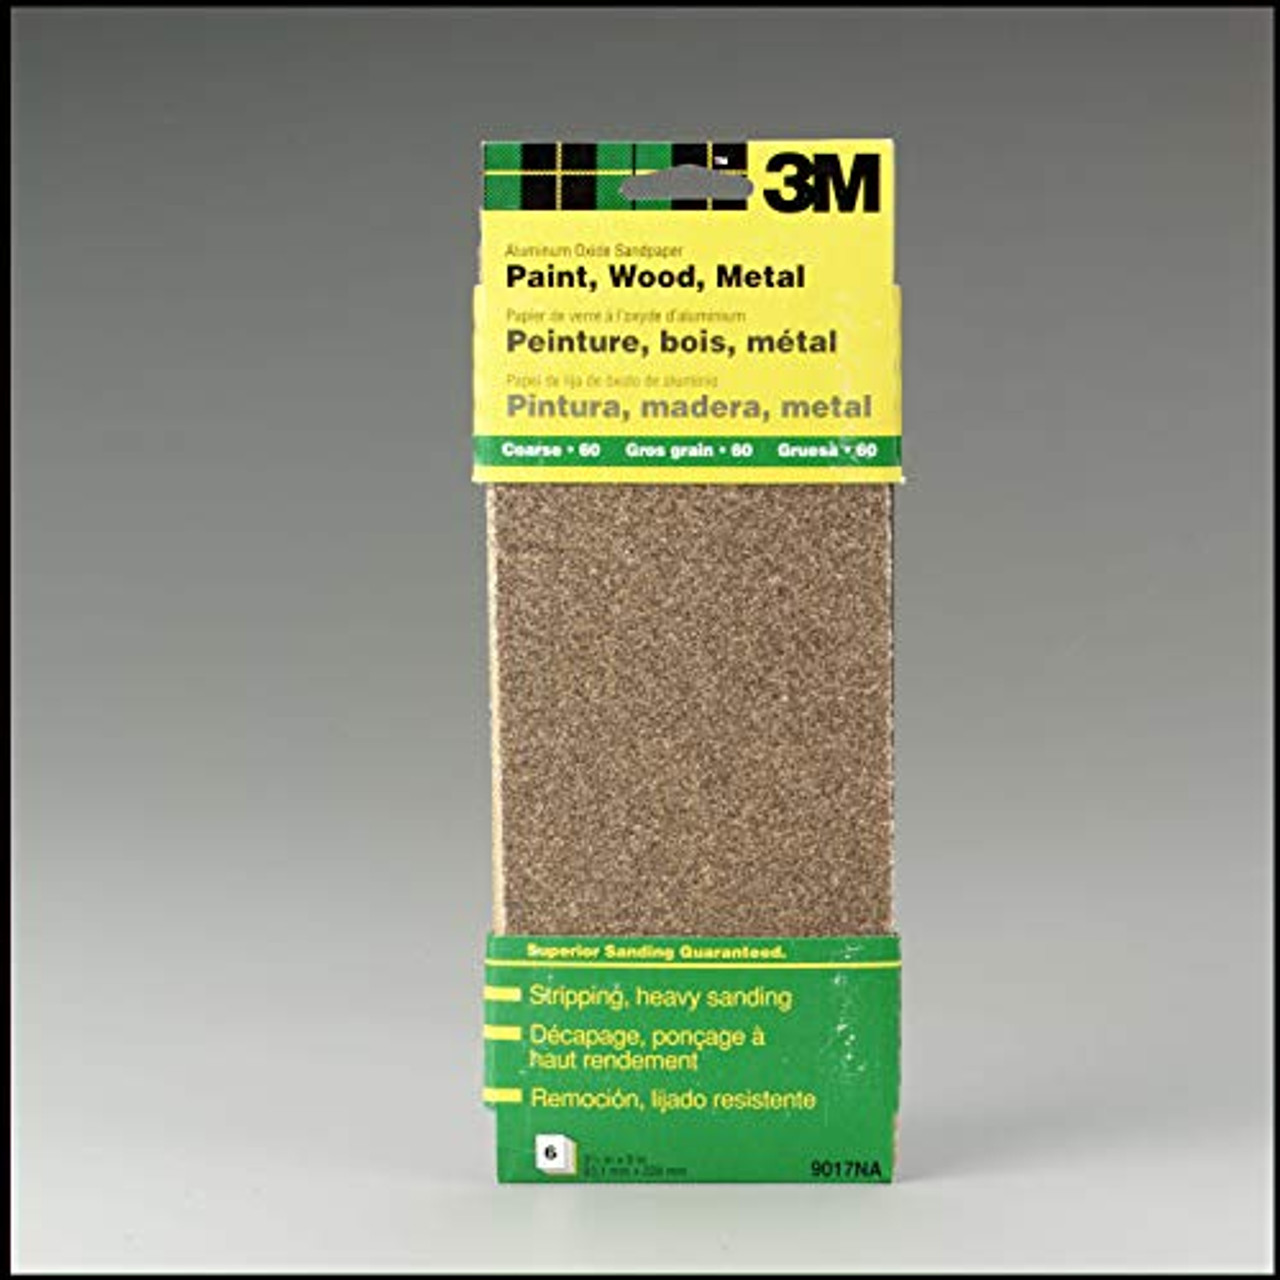 3M 9015NA-CC General Purpose Sandpaper Sheets, 3-2/3-in by 9-in, Fine Grit